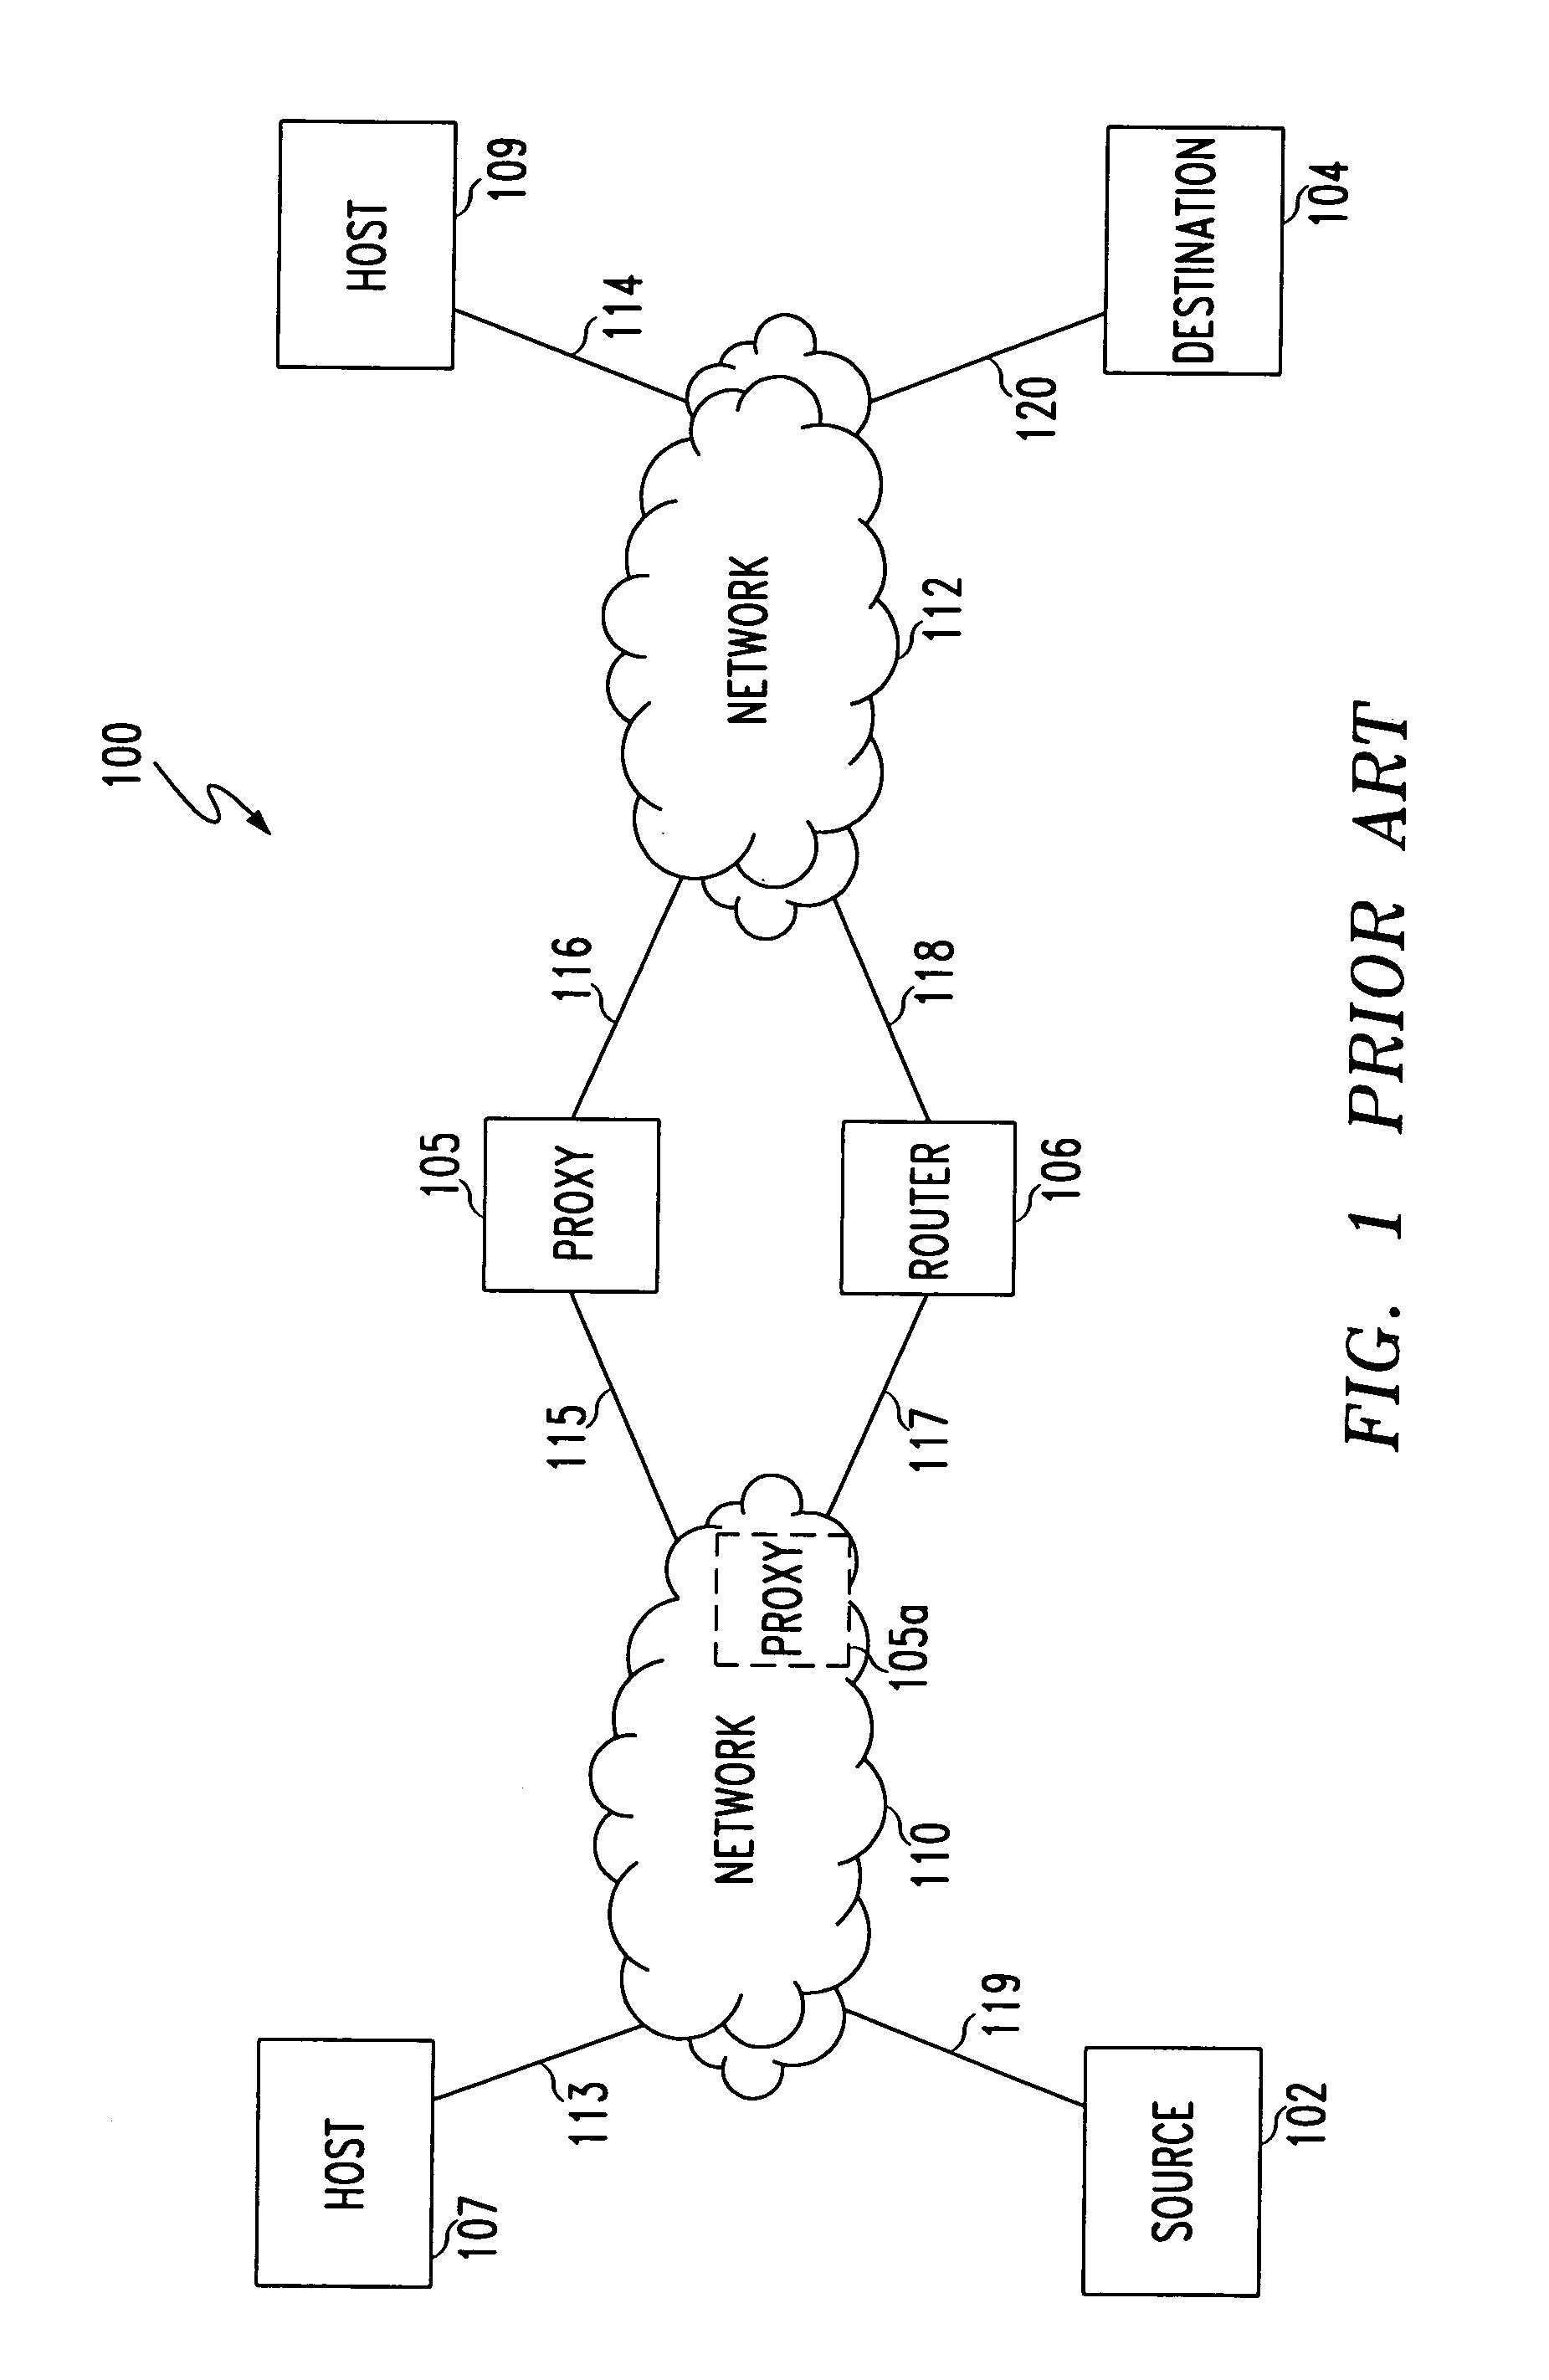 Apparatus and methods for providing translucent proxies in a communications network